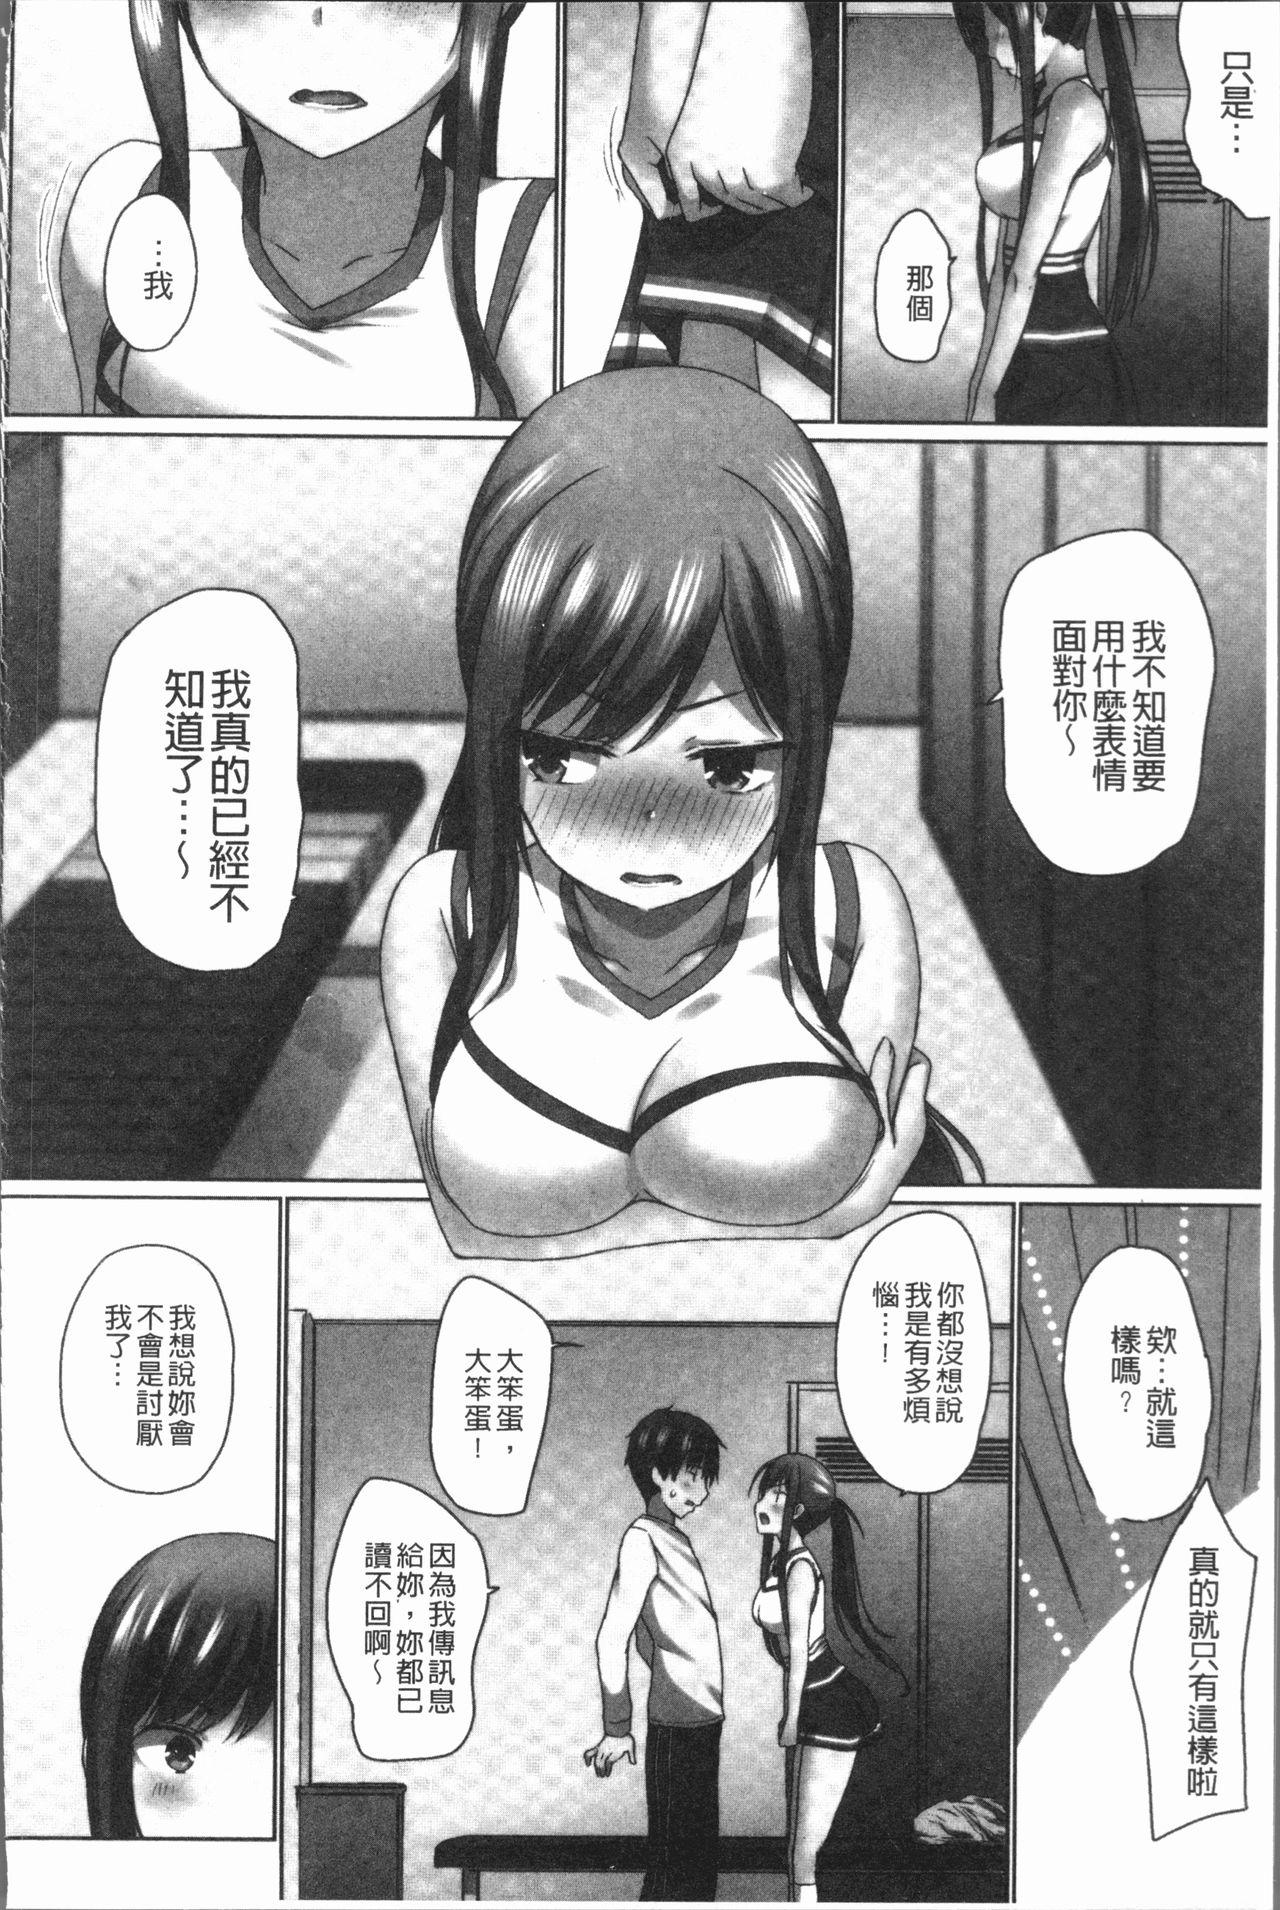 Overflow Page 114 Of 164 hentai comic, Overflow Page 114 Of 164 hentai douj...